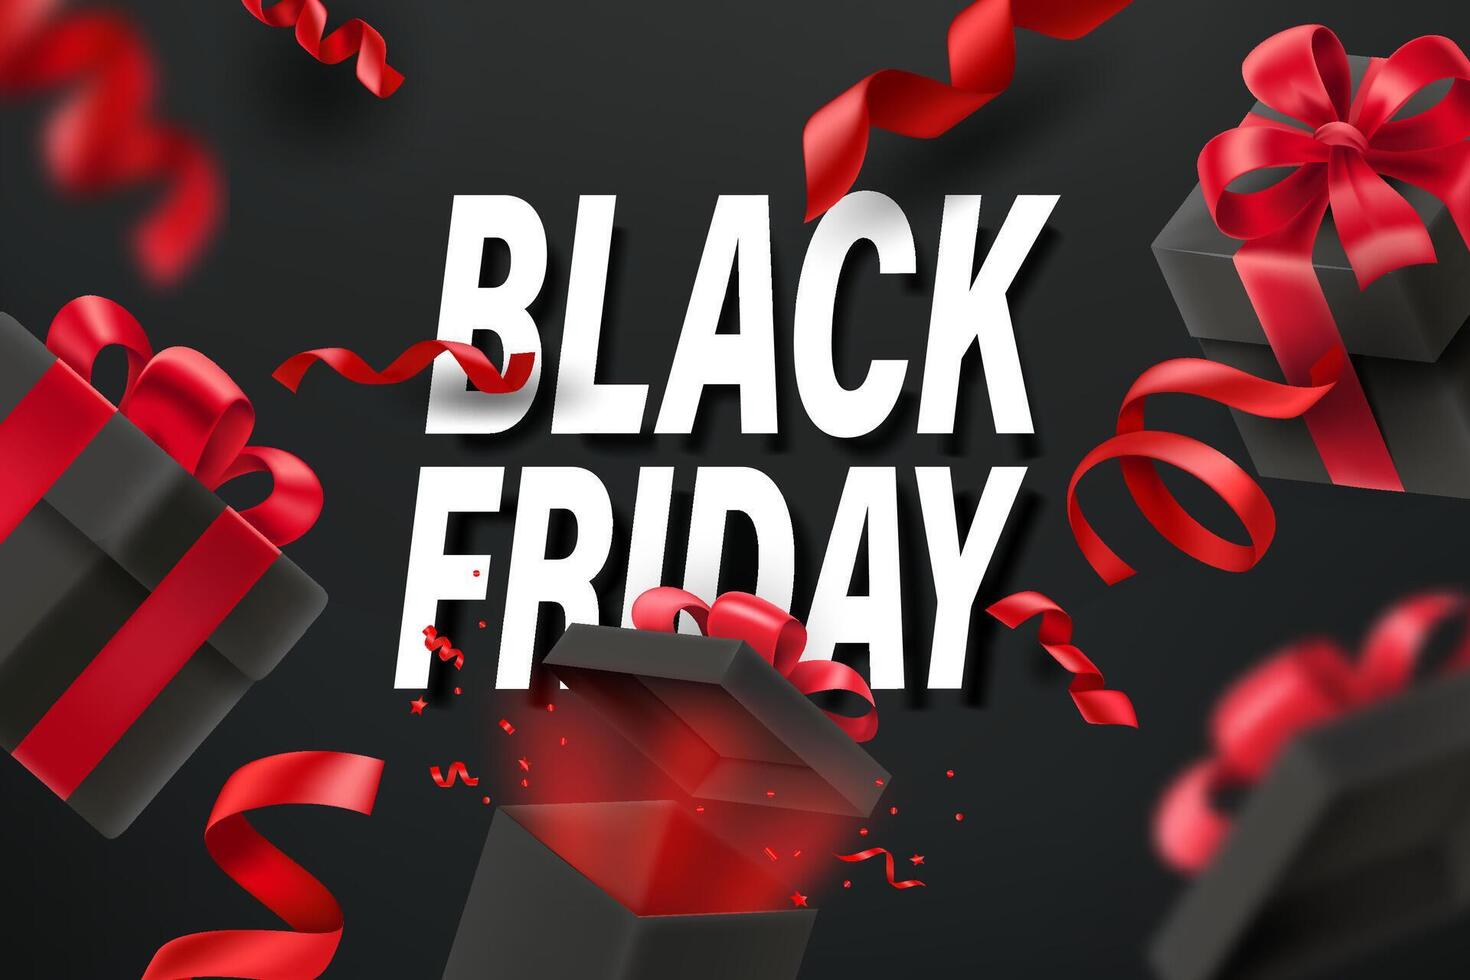 Black friday final sale vector banner with red ribbons and gift boxes